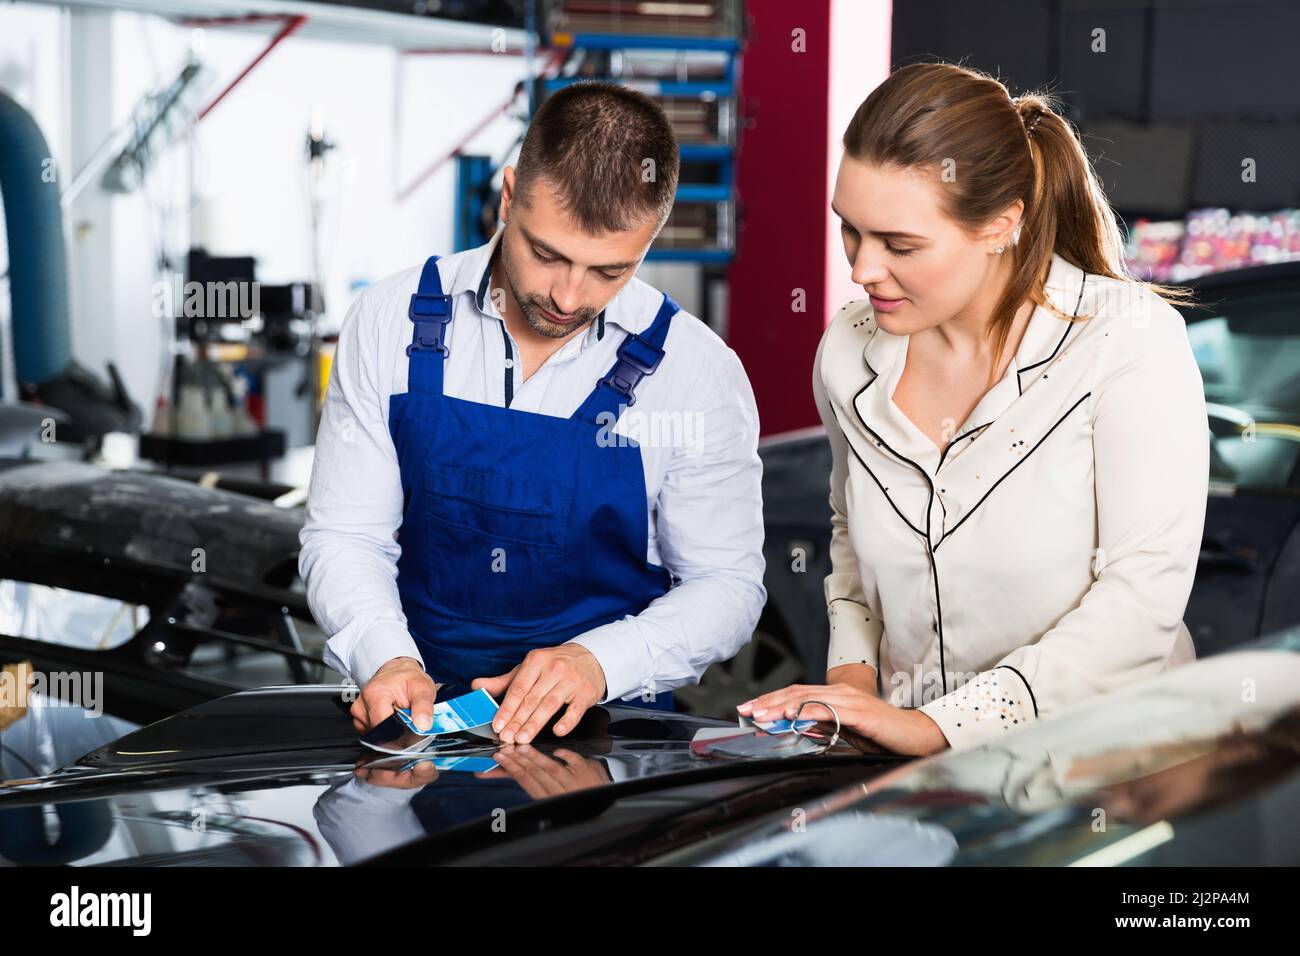 Serious car painter discussing with female client, picking up color of paint in auto repair shop Stock Photo